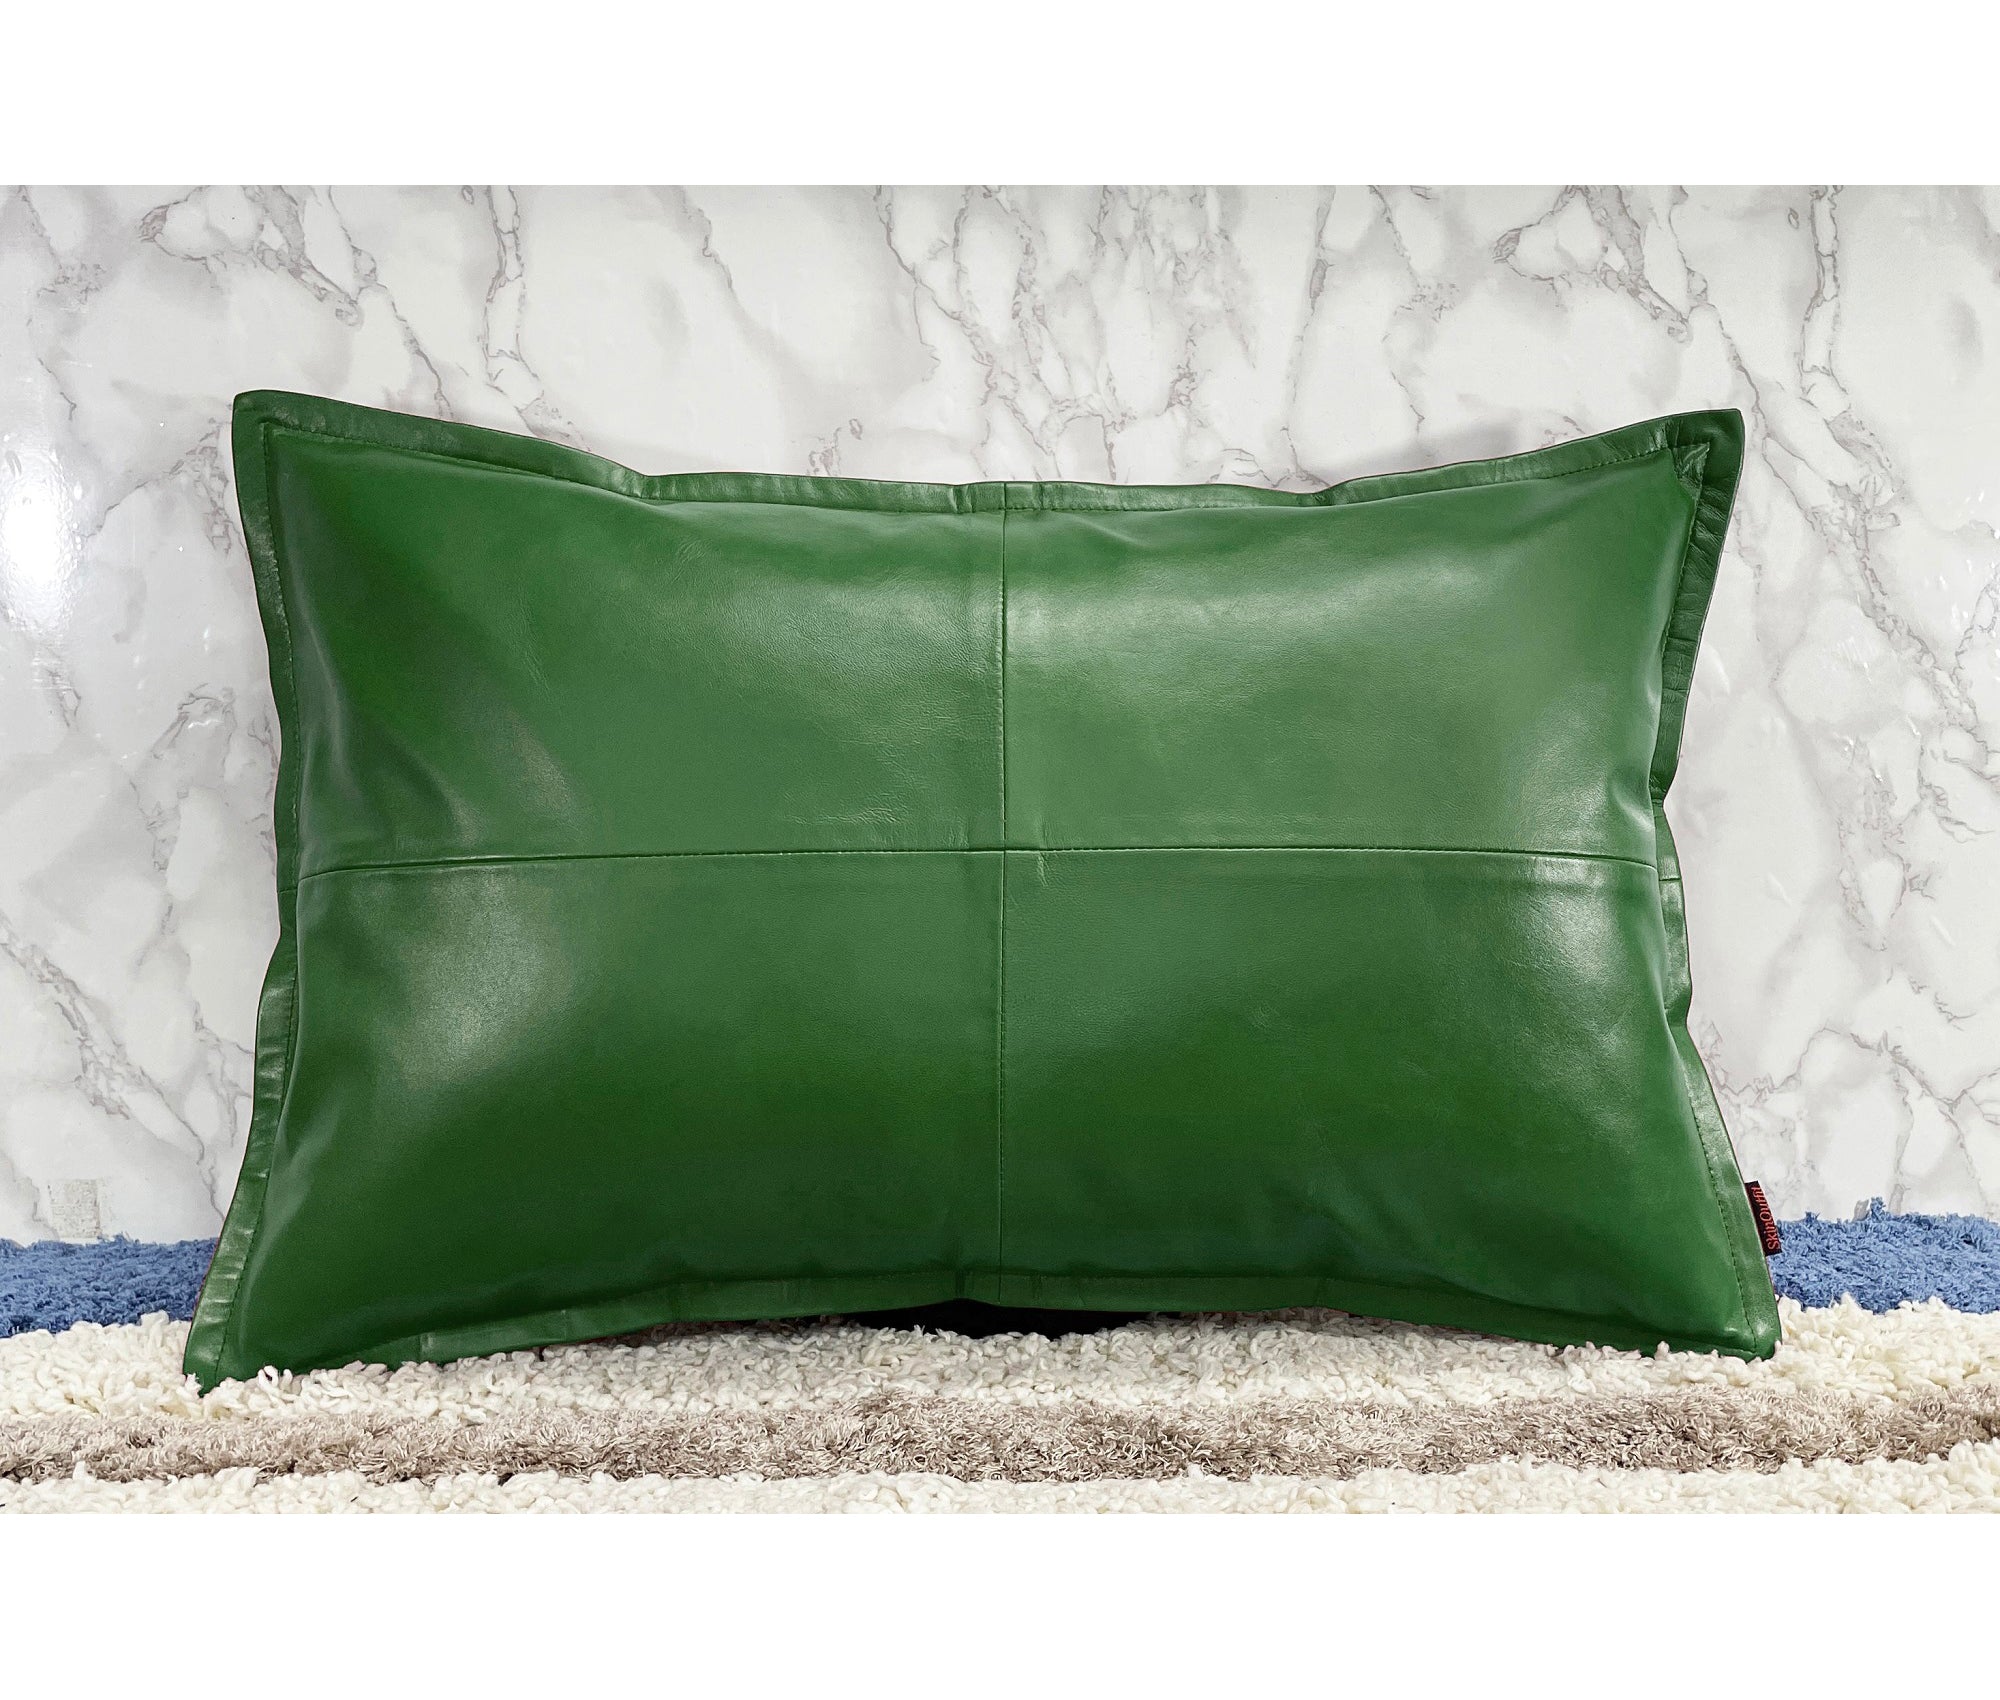 Genuine Leather Rectangle Pillow Cover 35 SkinOutfit